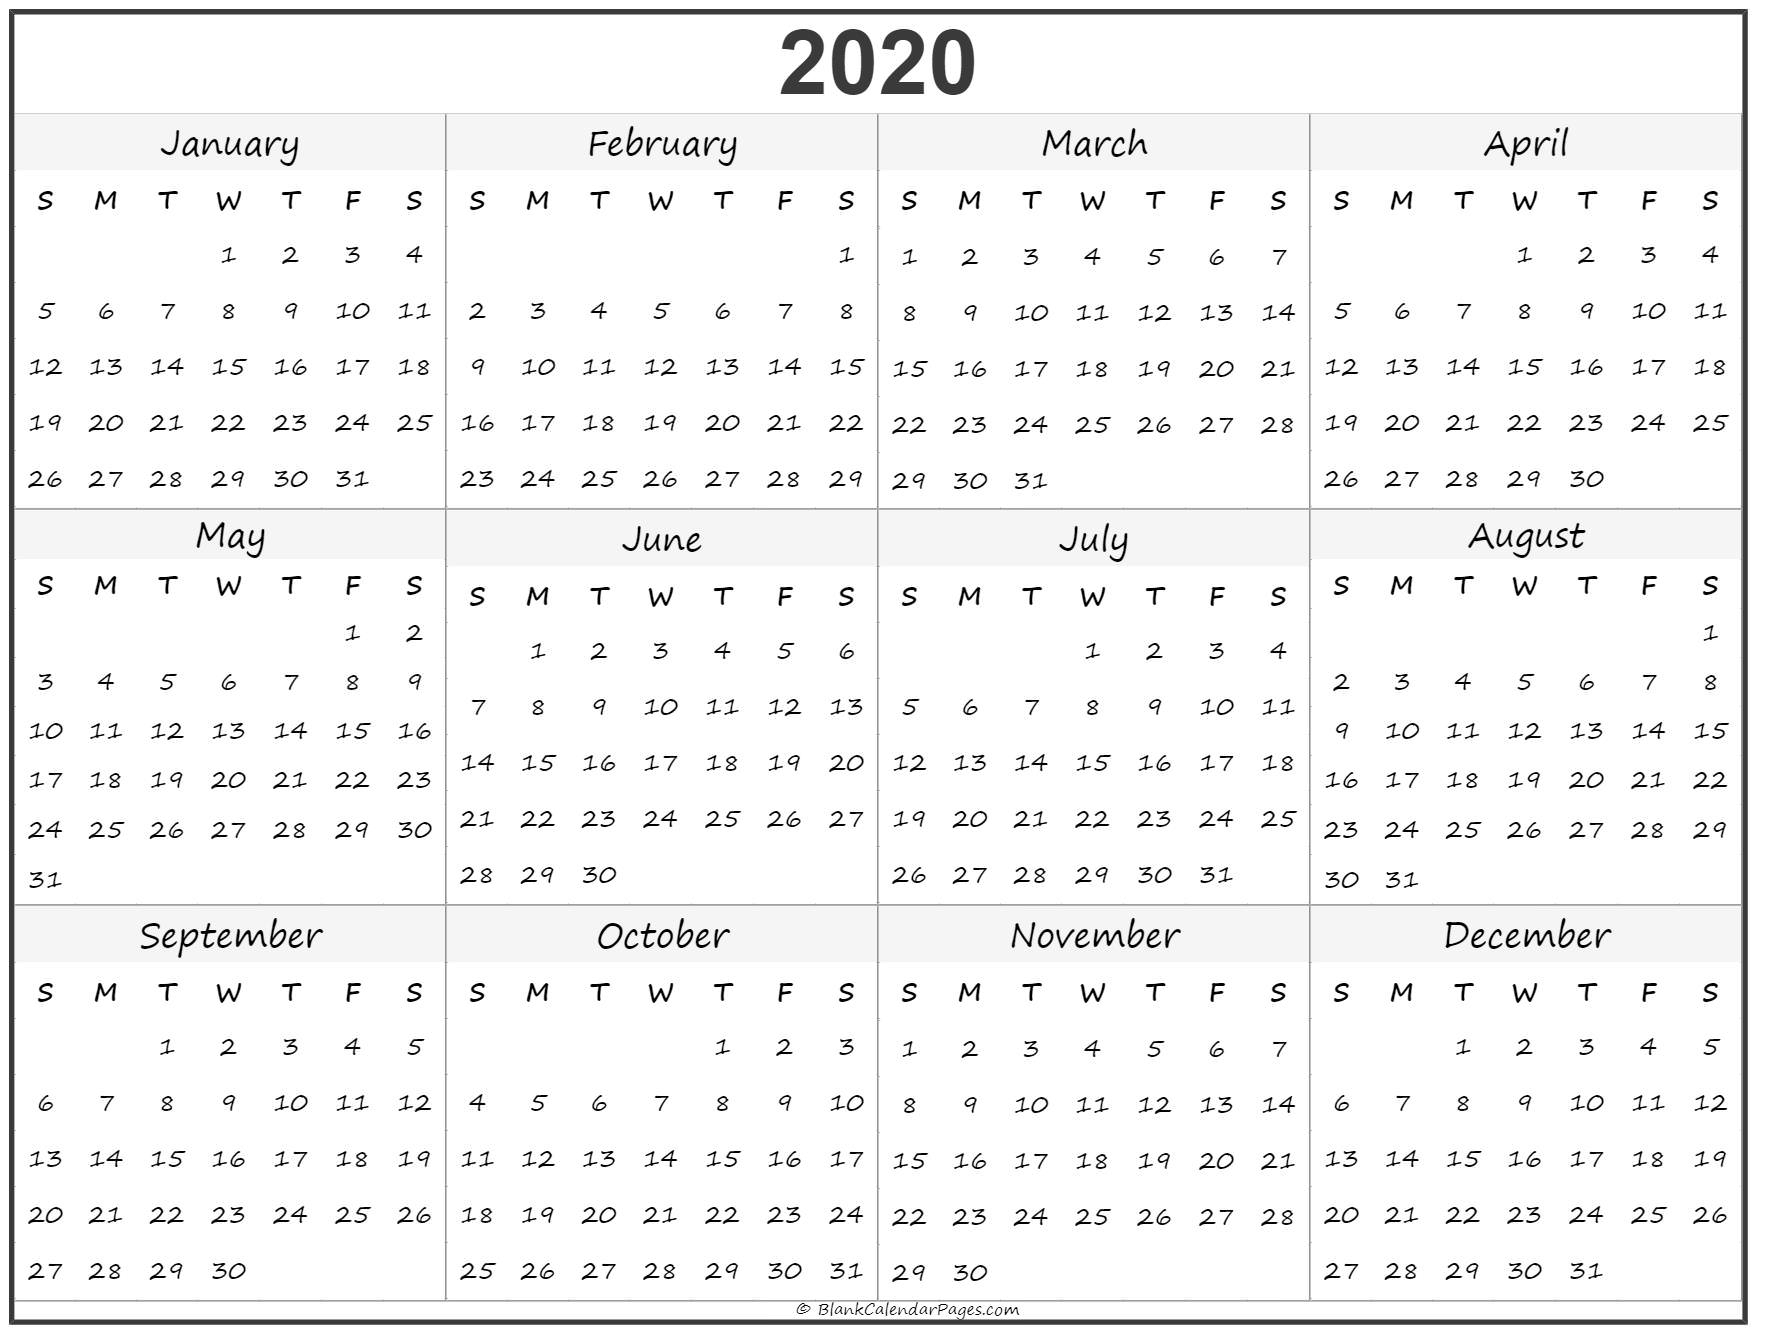 2020 Calendar Yearly - Togo.wpart.co